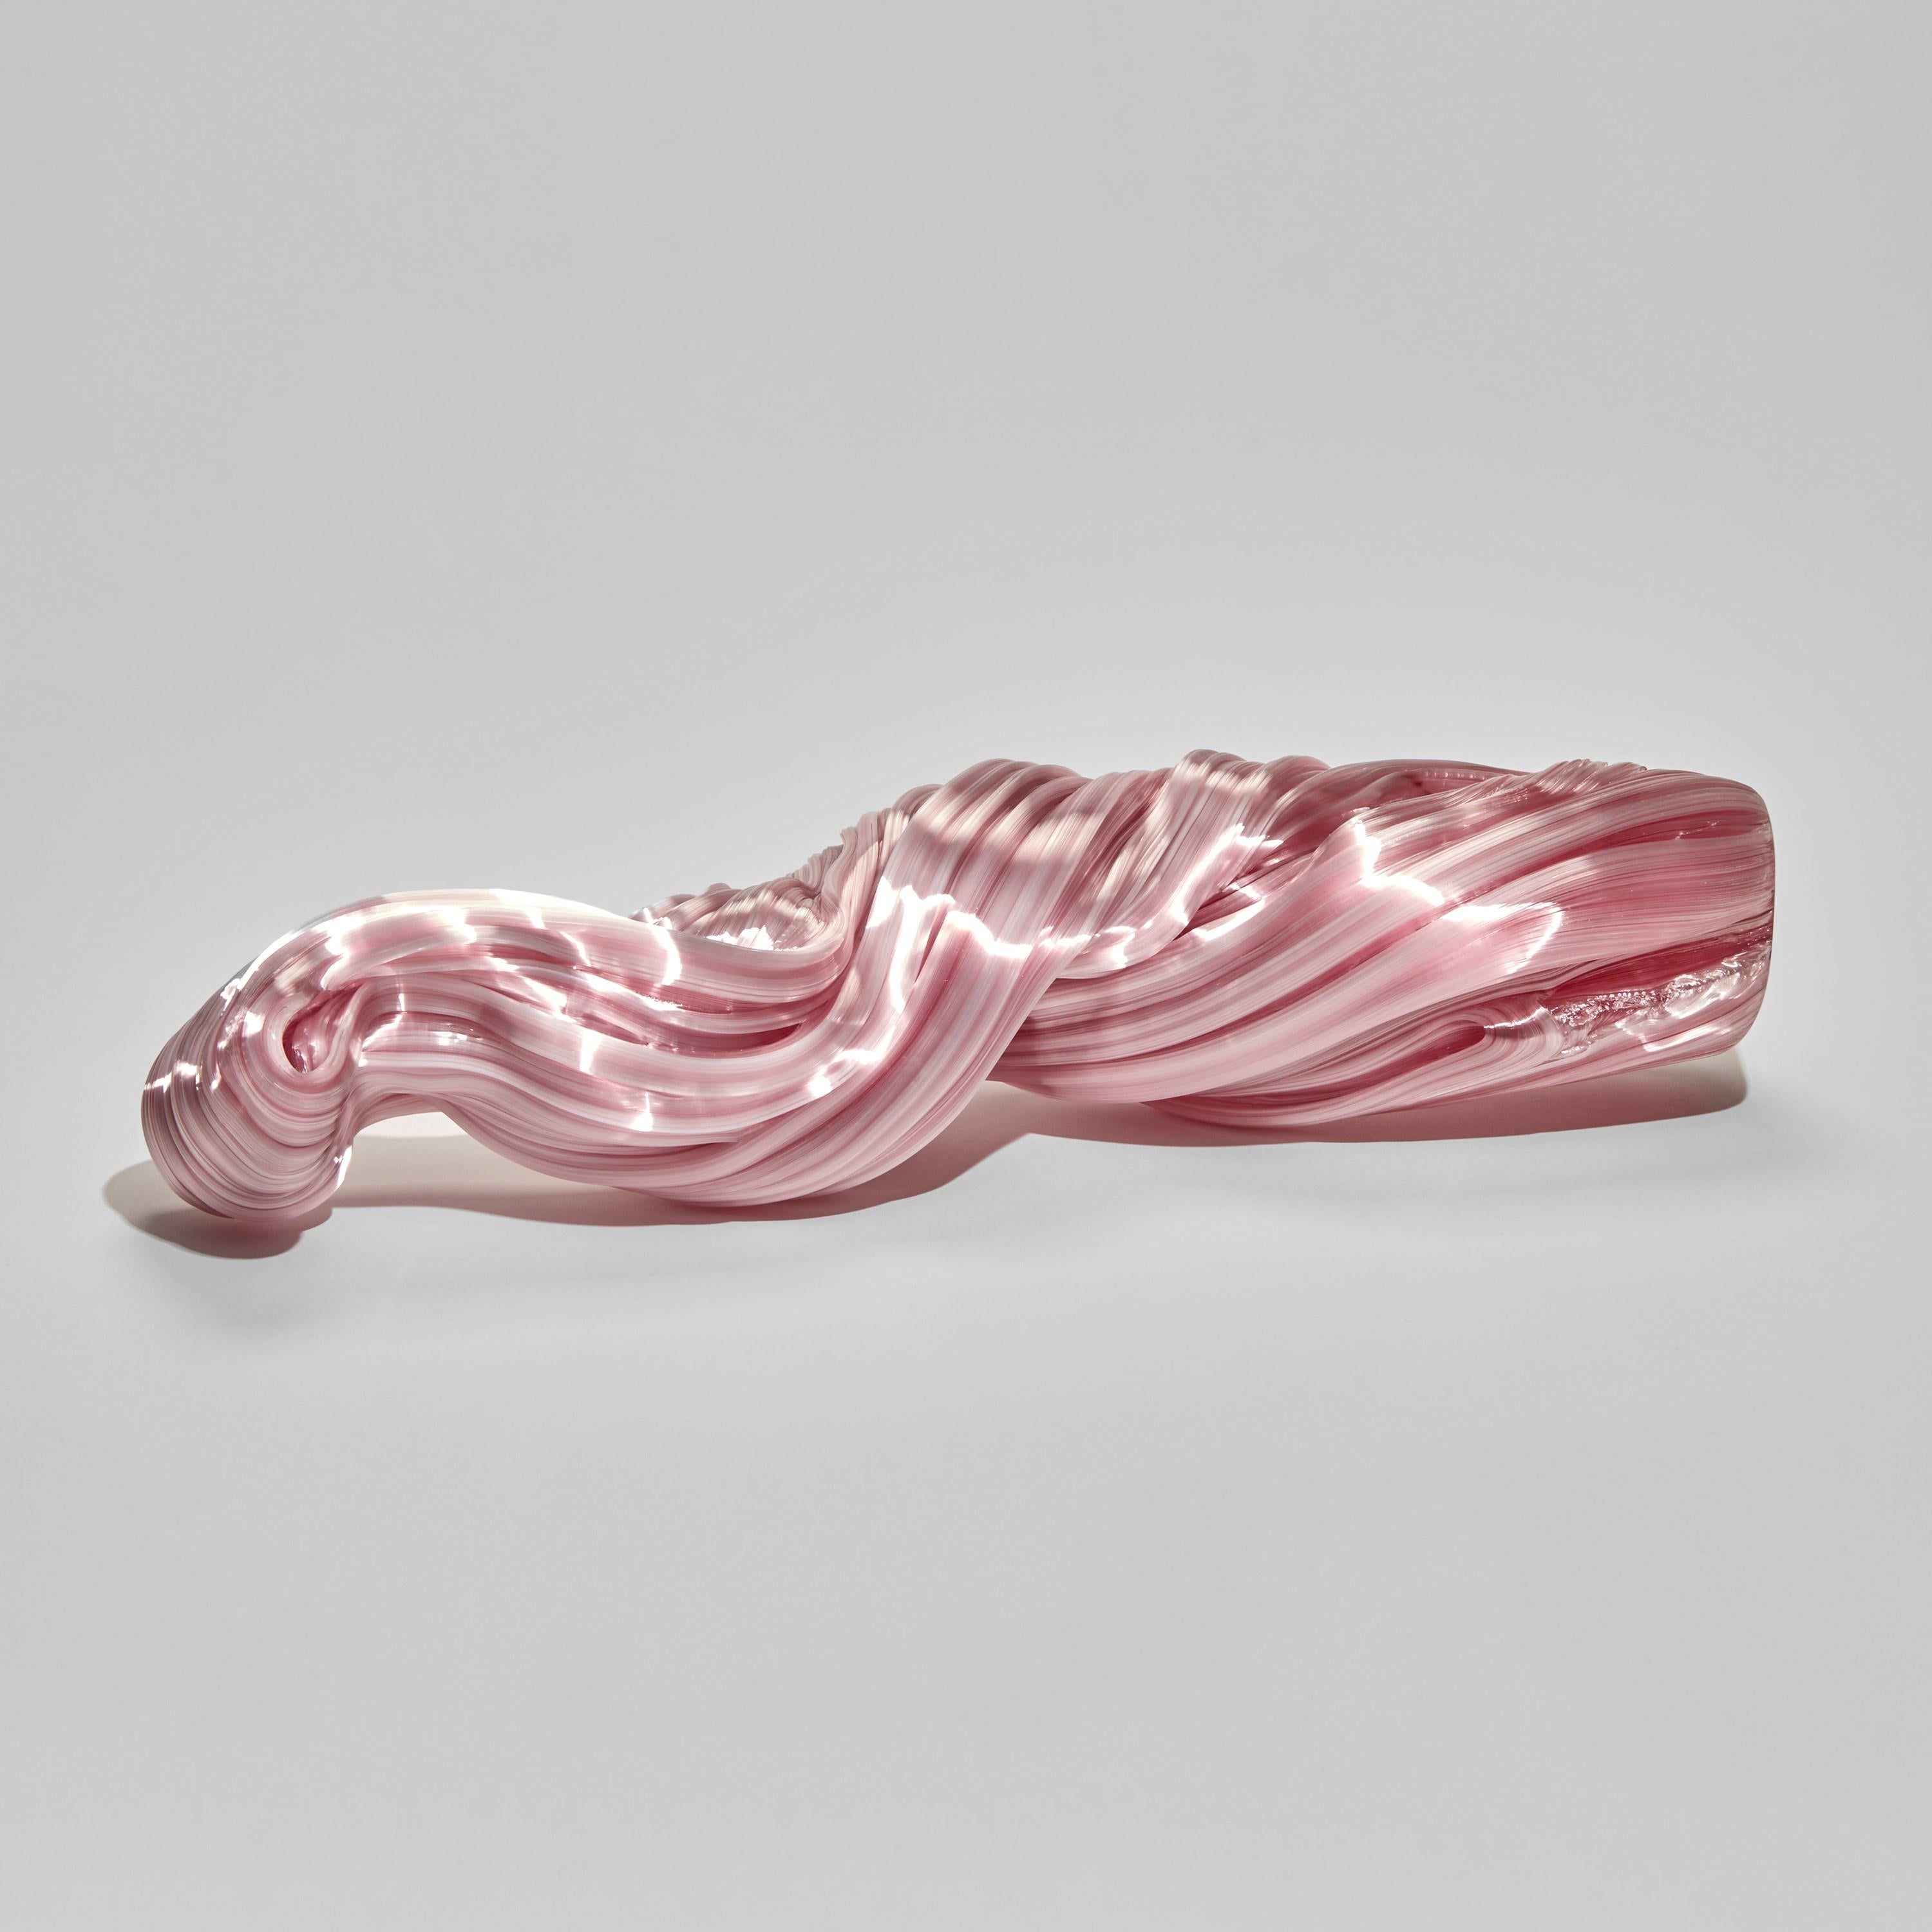 ‘Slow Movement in Pink' is a unique glass sculpture by the Danish artist, Maria Bang Espersen.

Maria Bang Espersen works around the idea that all things are malleable, like glass, and that nothing can be permanently defined. Her experimental